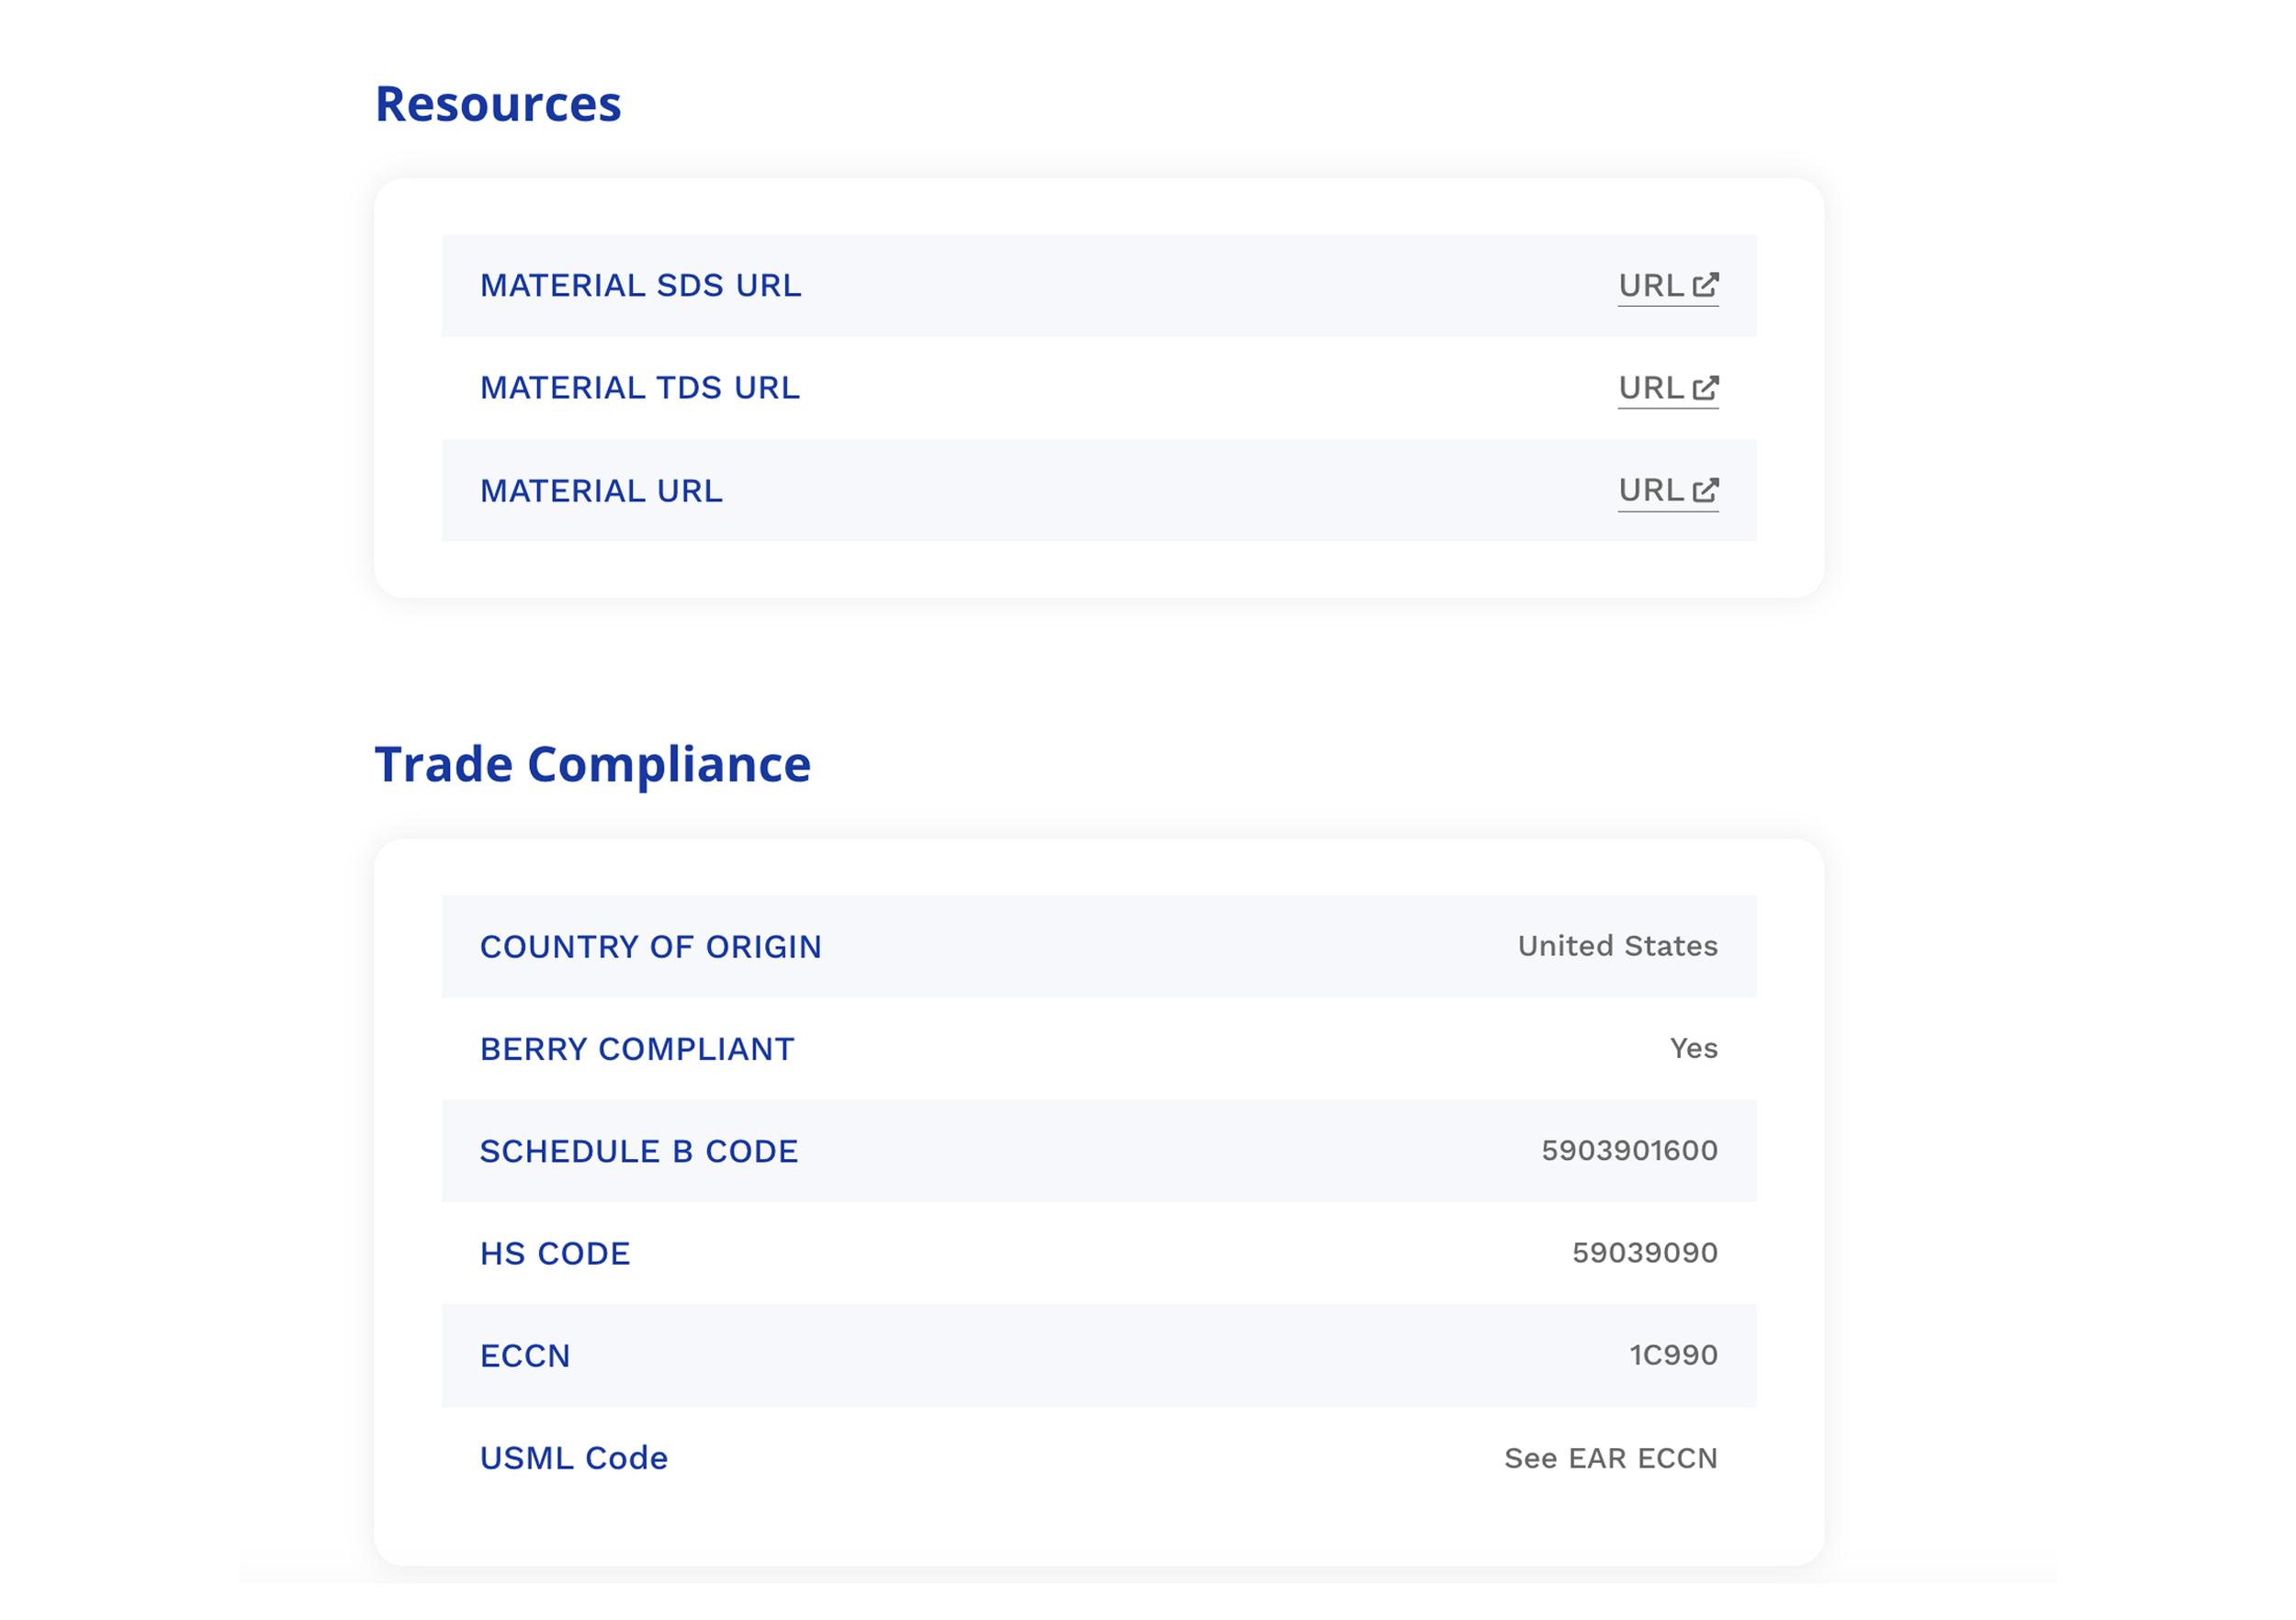 TAL-Dyneema-HB56-Resources-Trade-Compliance.png